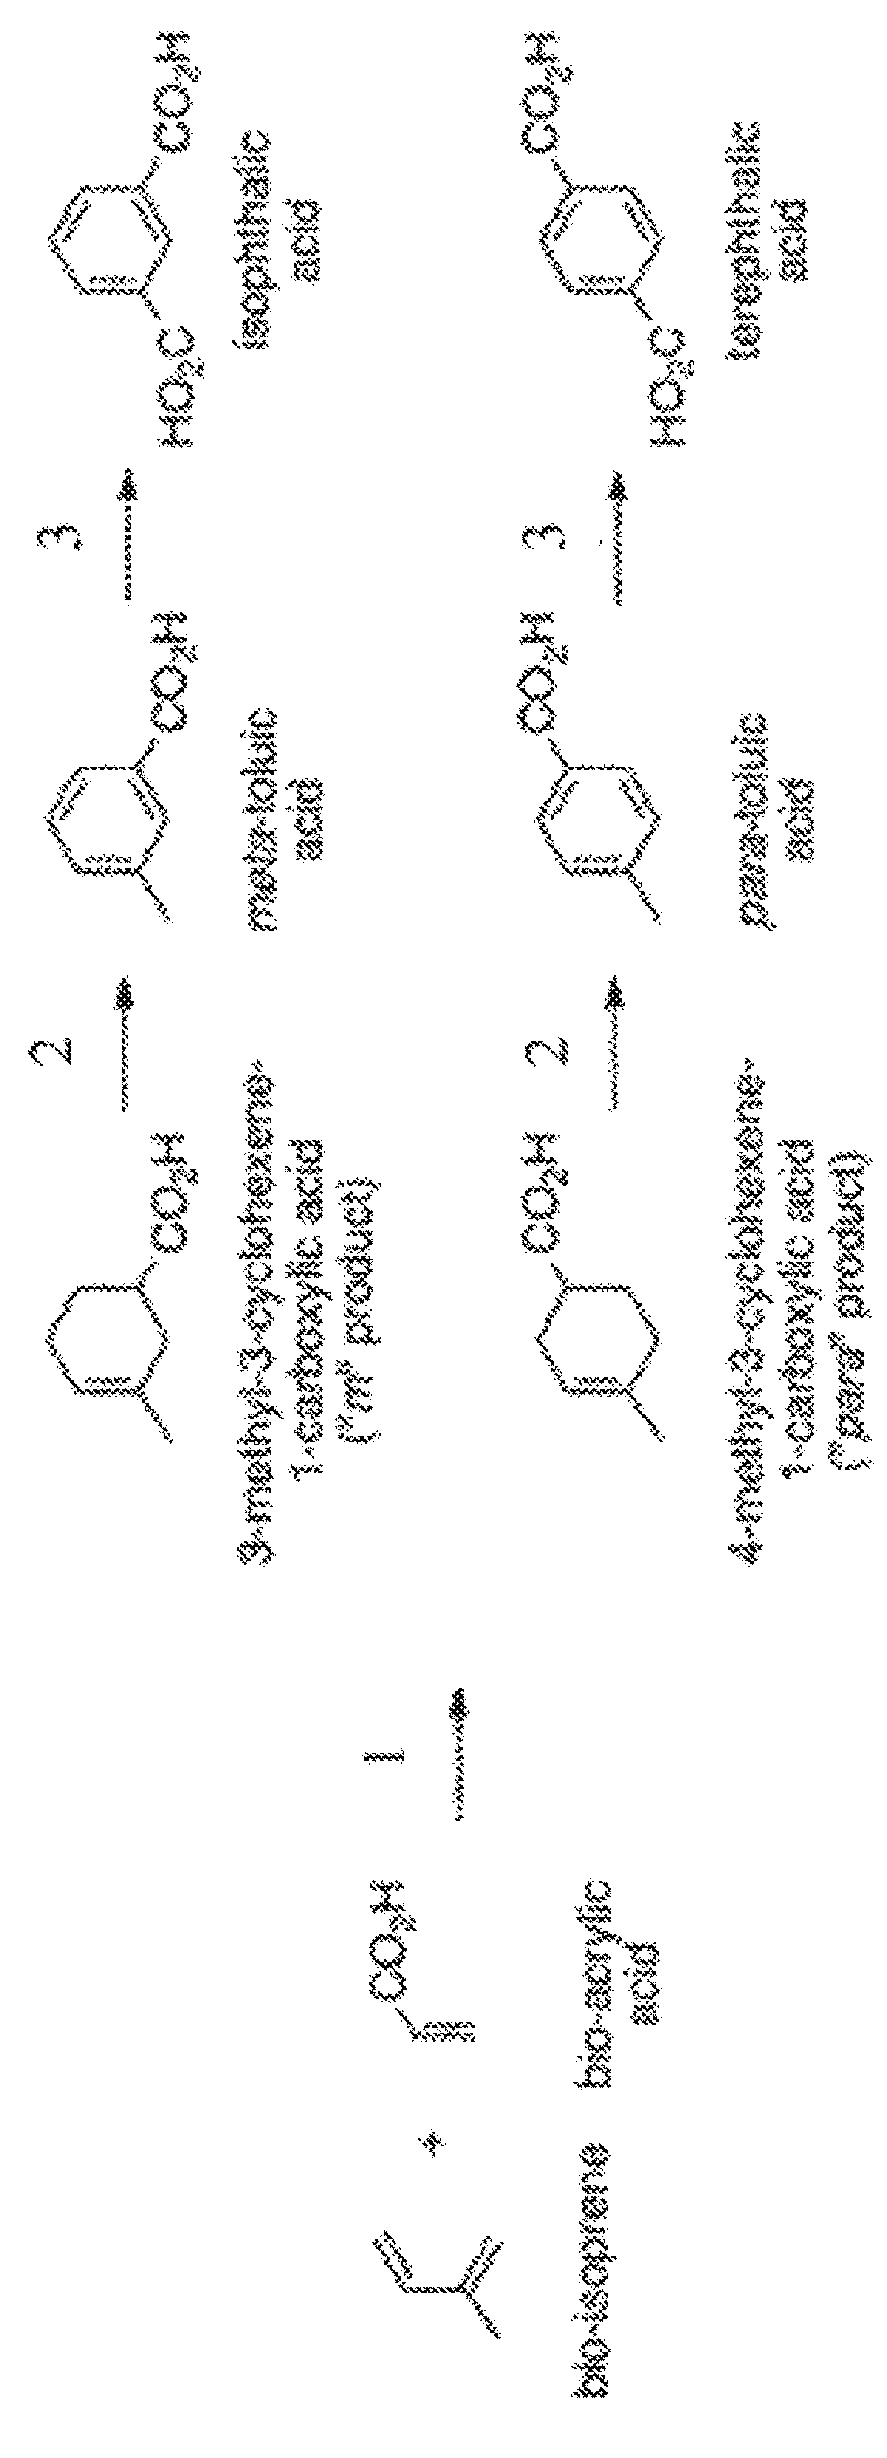 Born-Based Cycloaddition Catalysts and Methods for the Production of Bio-Based Terephthalic Acid, Isophthalic Acid and Poly (Ethylene Terephthalate)